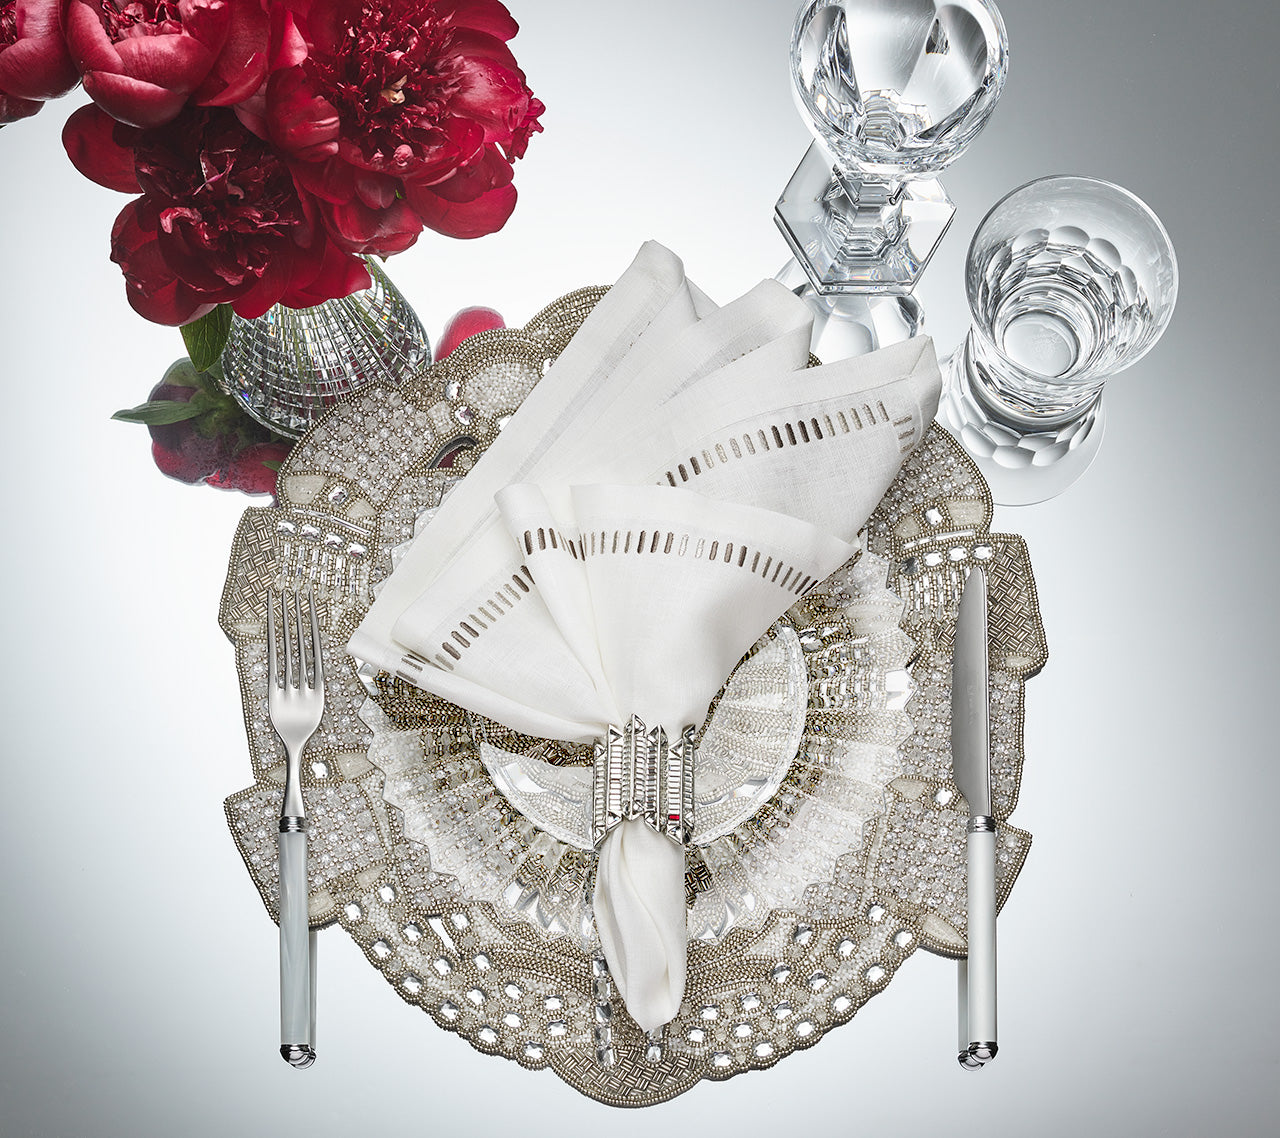 Etoile Napkin Ring in Silver & Crystal, Set of 4 in a Gift Box